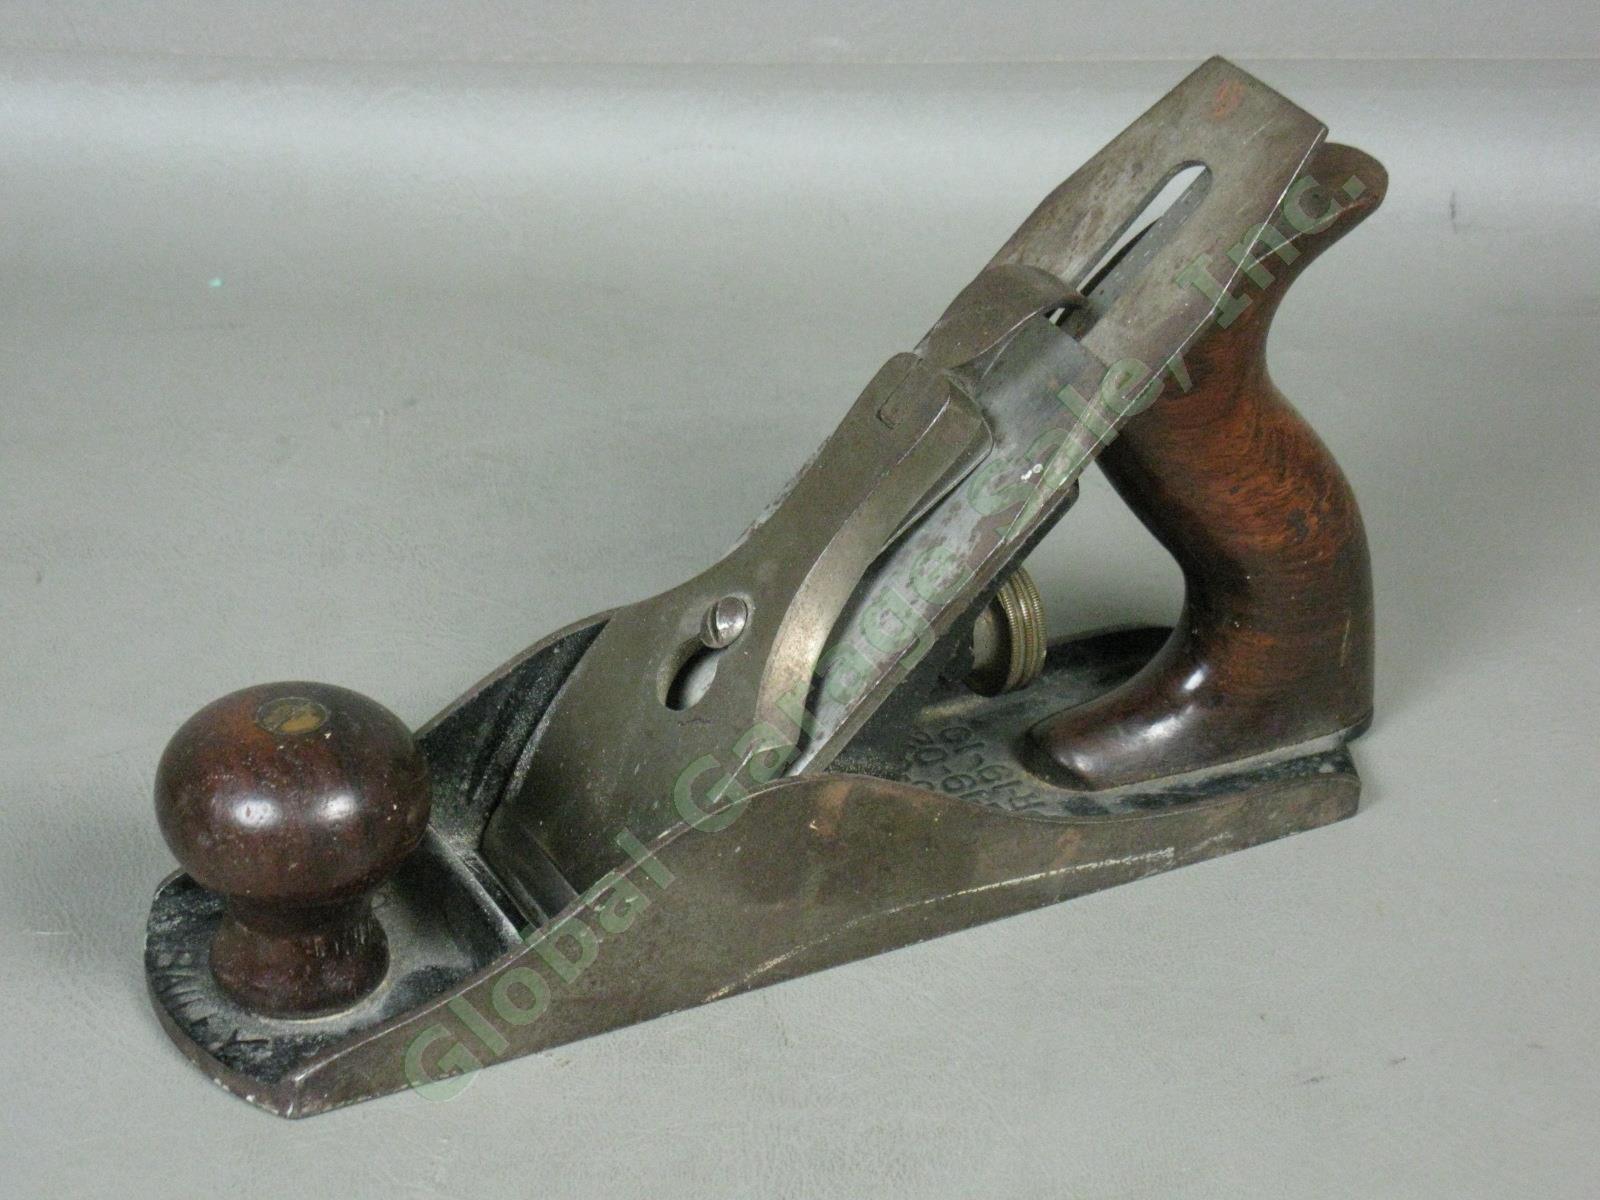 Vintage Stanley Bailey No 4 Smooth Bottom Carpentry Wood Plane Pat 4/19/1910 NR!